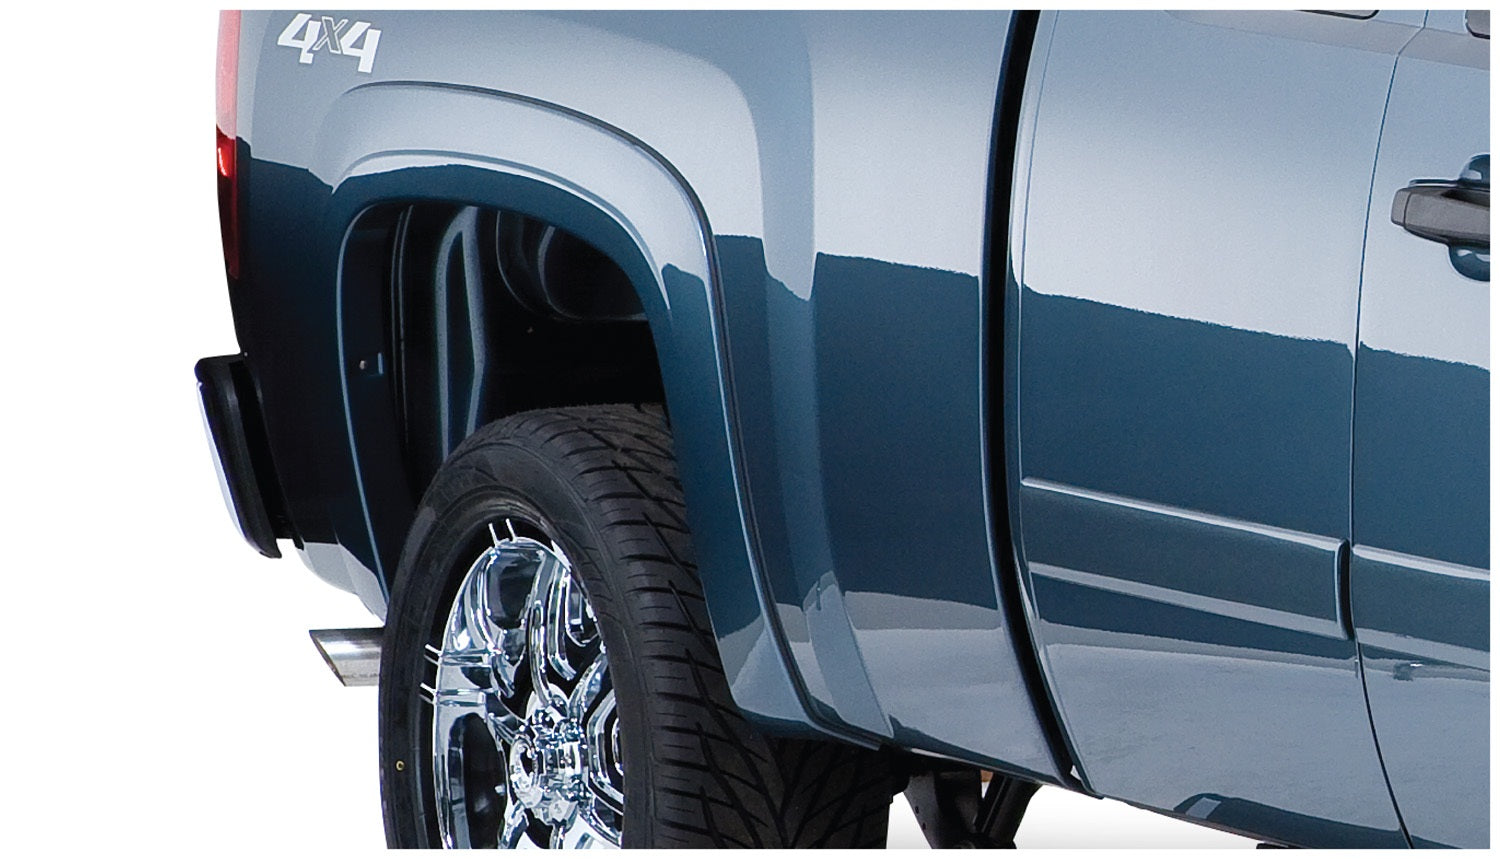 Bushwacker 40941-02 Black OE-Style Smooth Finish 4-Piece Fender Flare Set for 2007-2013 Chevrolet Silverado 1500 | Fits 69.3 in. Bed